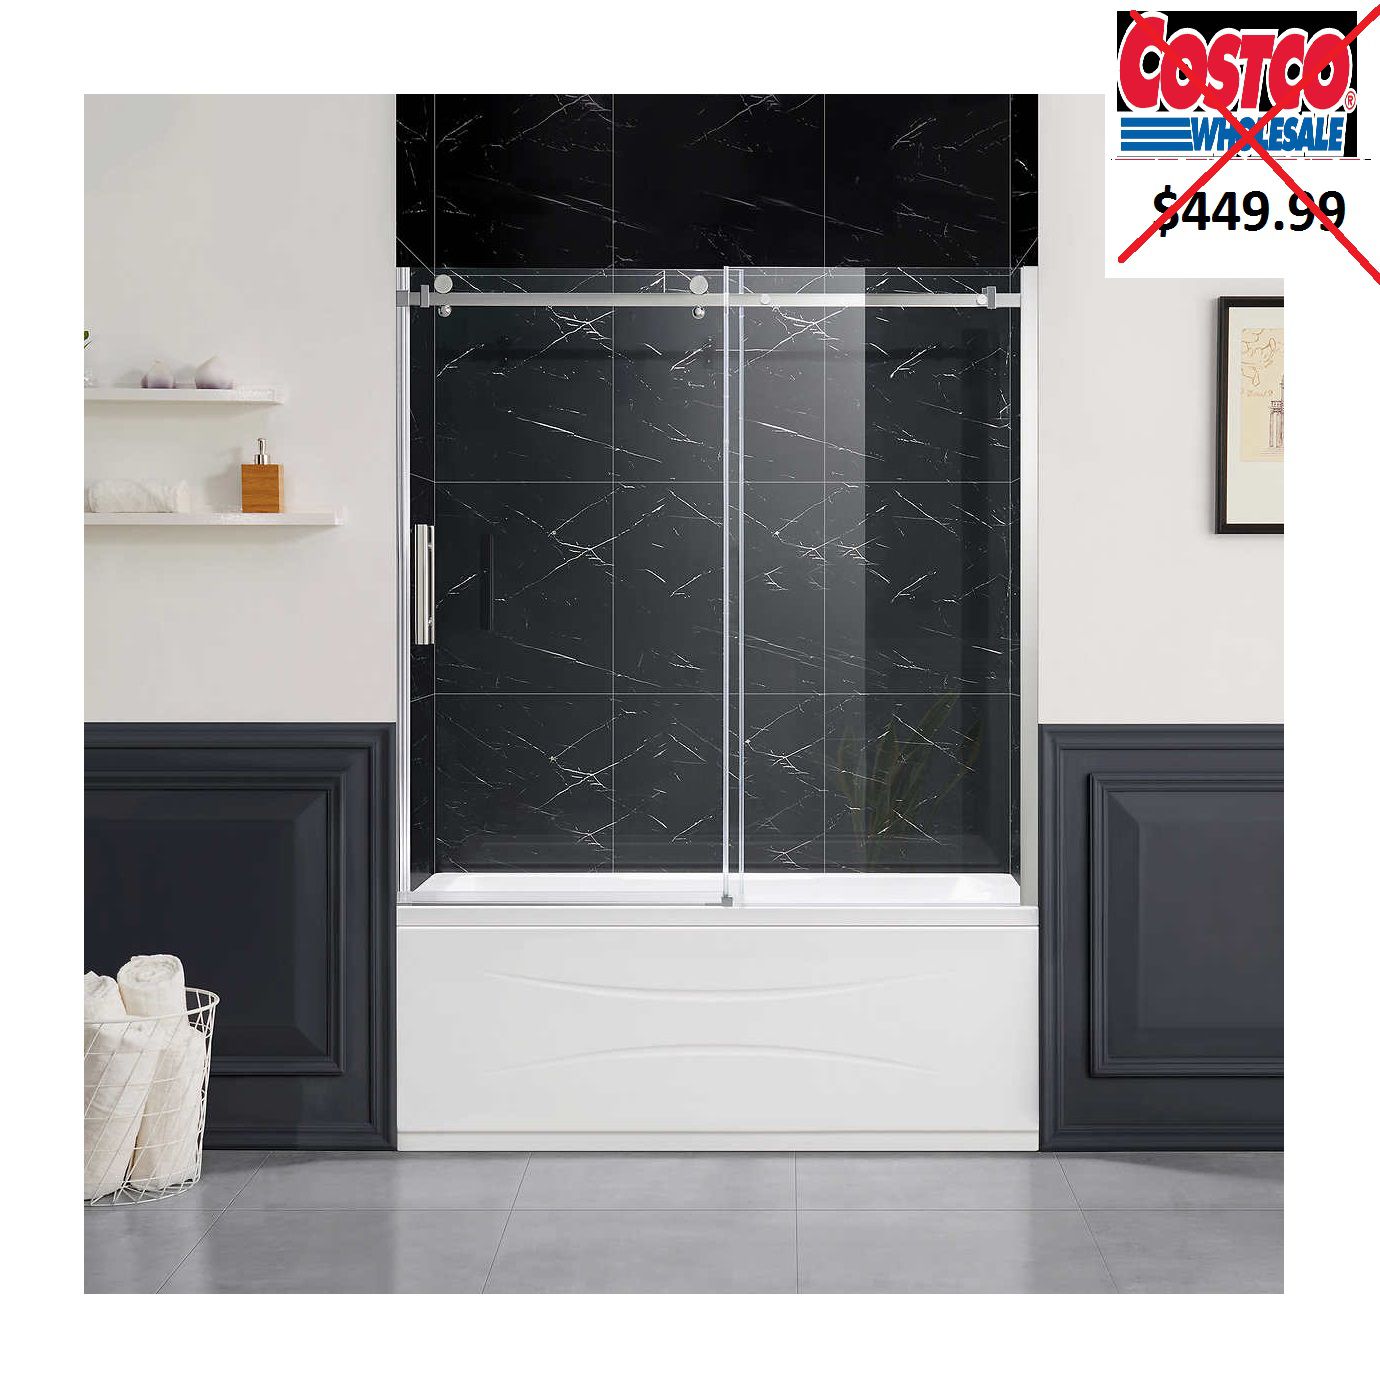 Park 60" Tub Sliding Glass Door by OVE